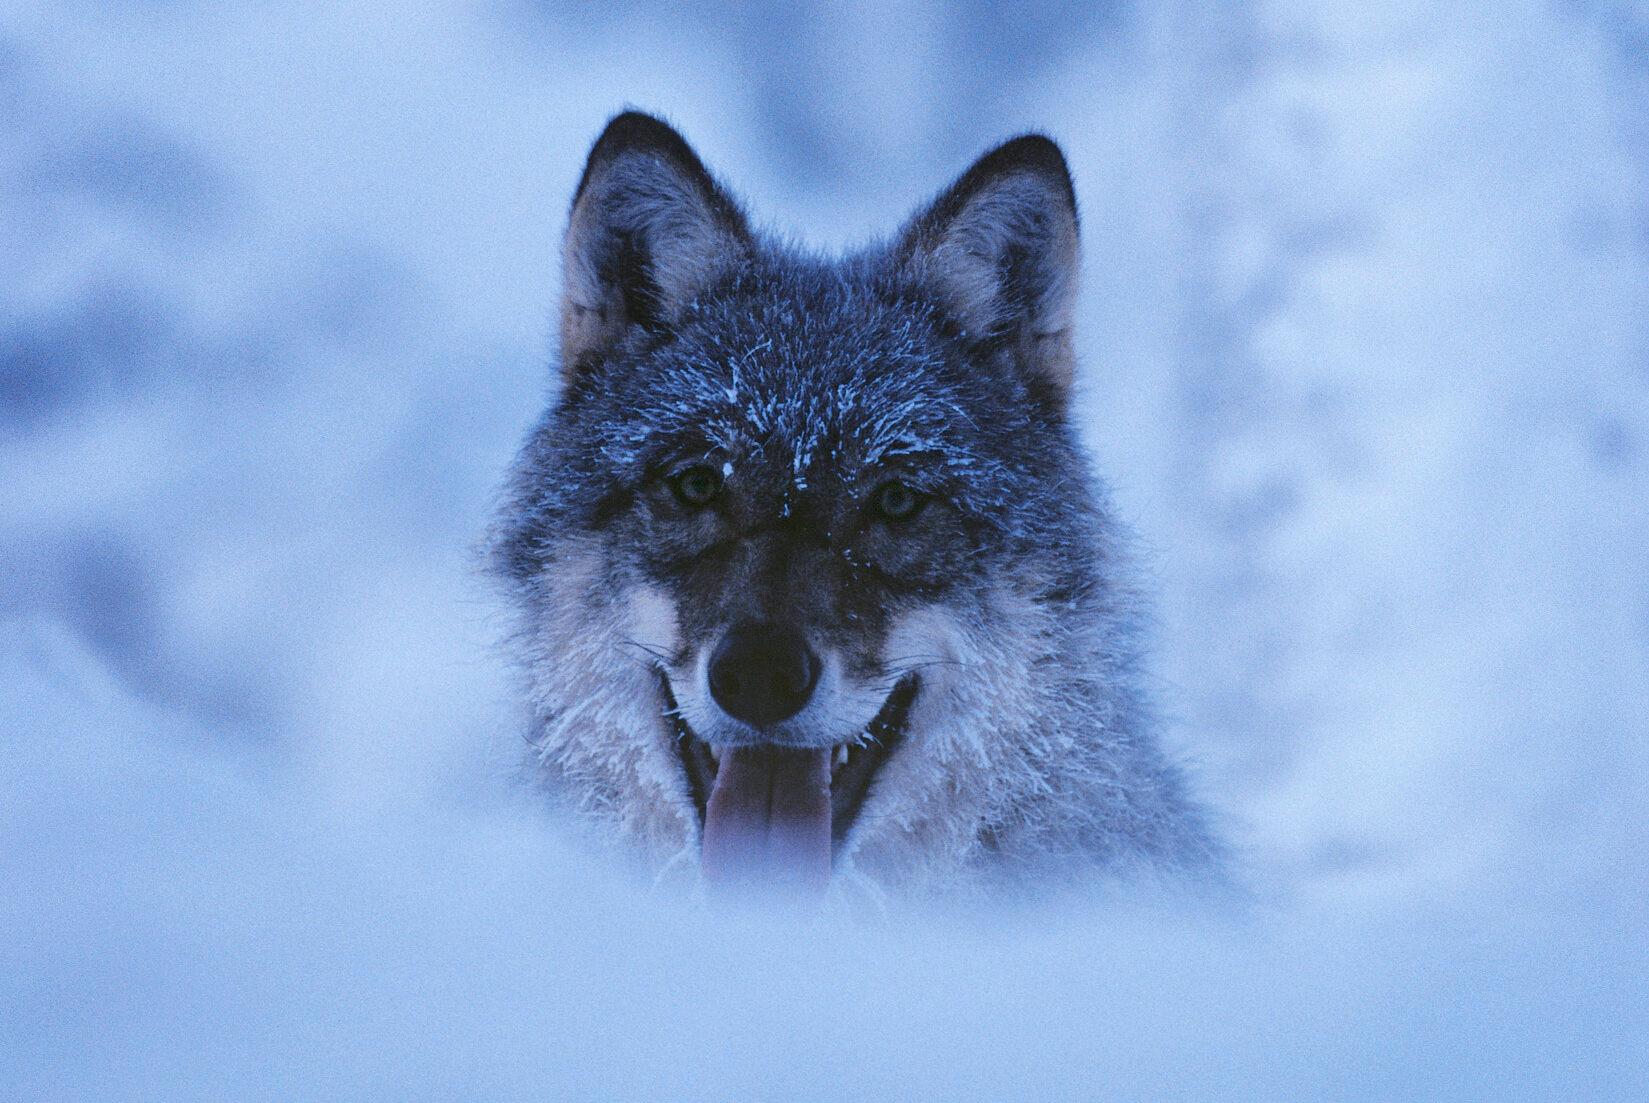 The face of a wolf in a snowy landscape.